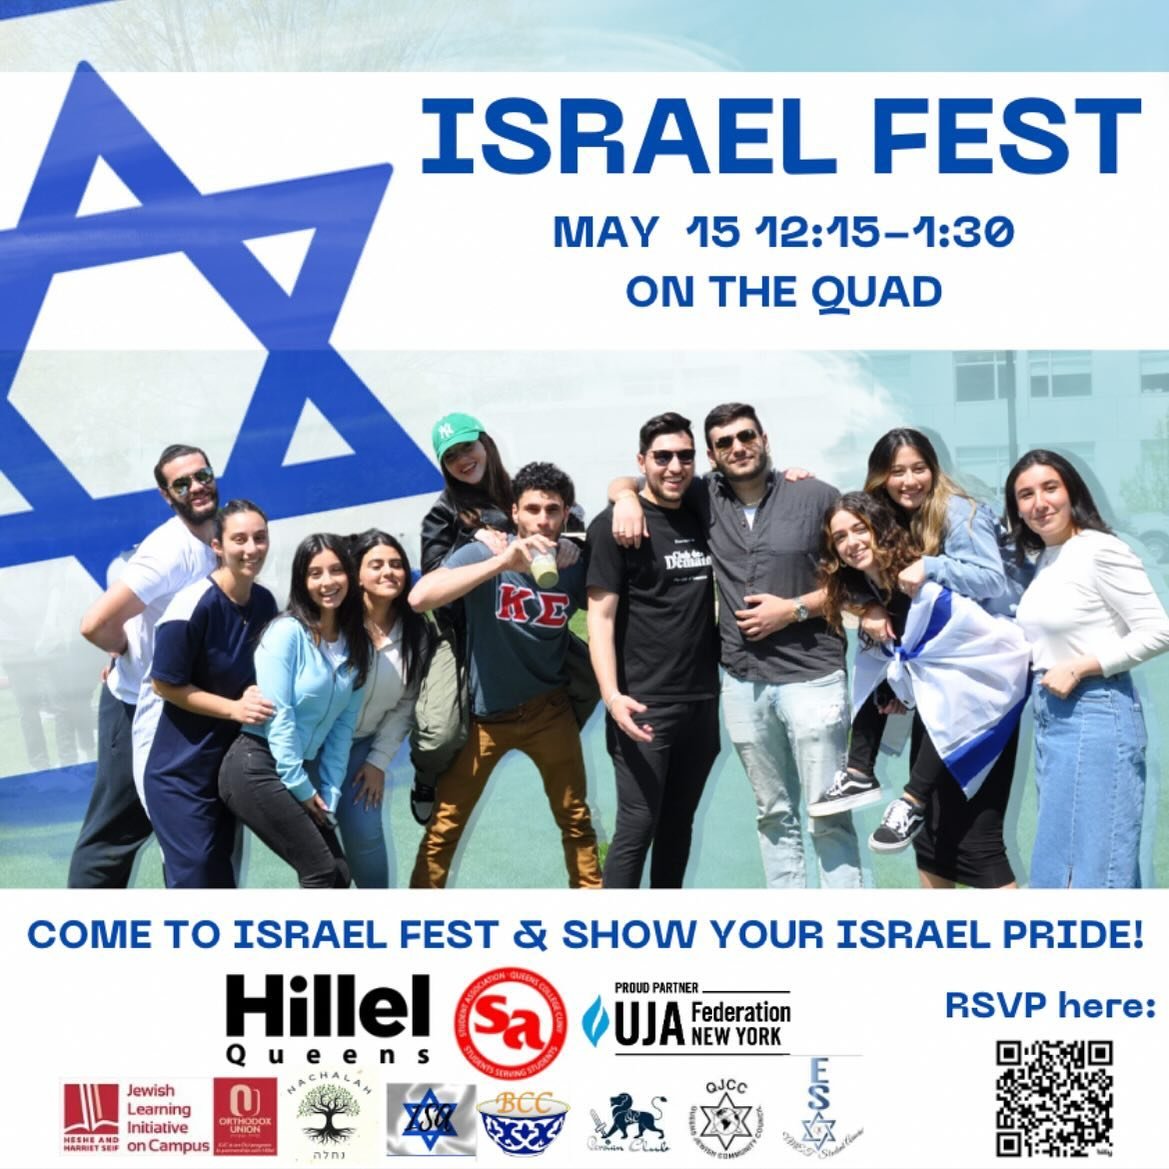 Join us at QC on May 15th for Israel Fest! We&rsquo;ll be out on the quad celebrating with food, music, and fun activities! Hope to see you there! 

Link in bio to register